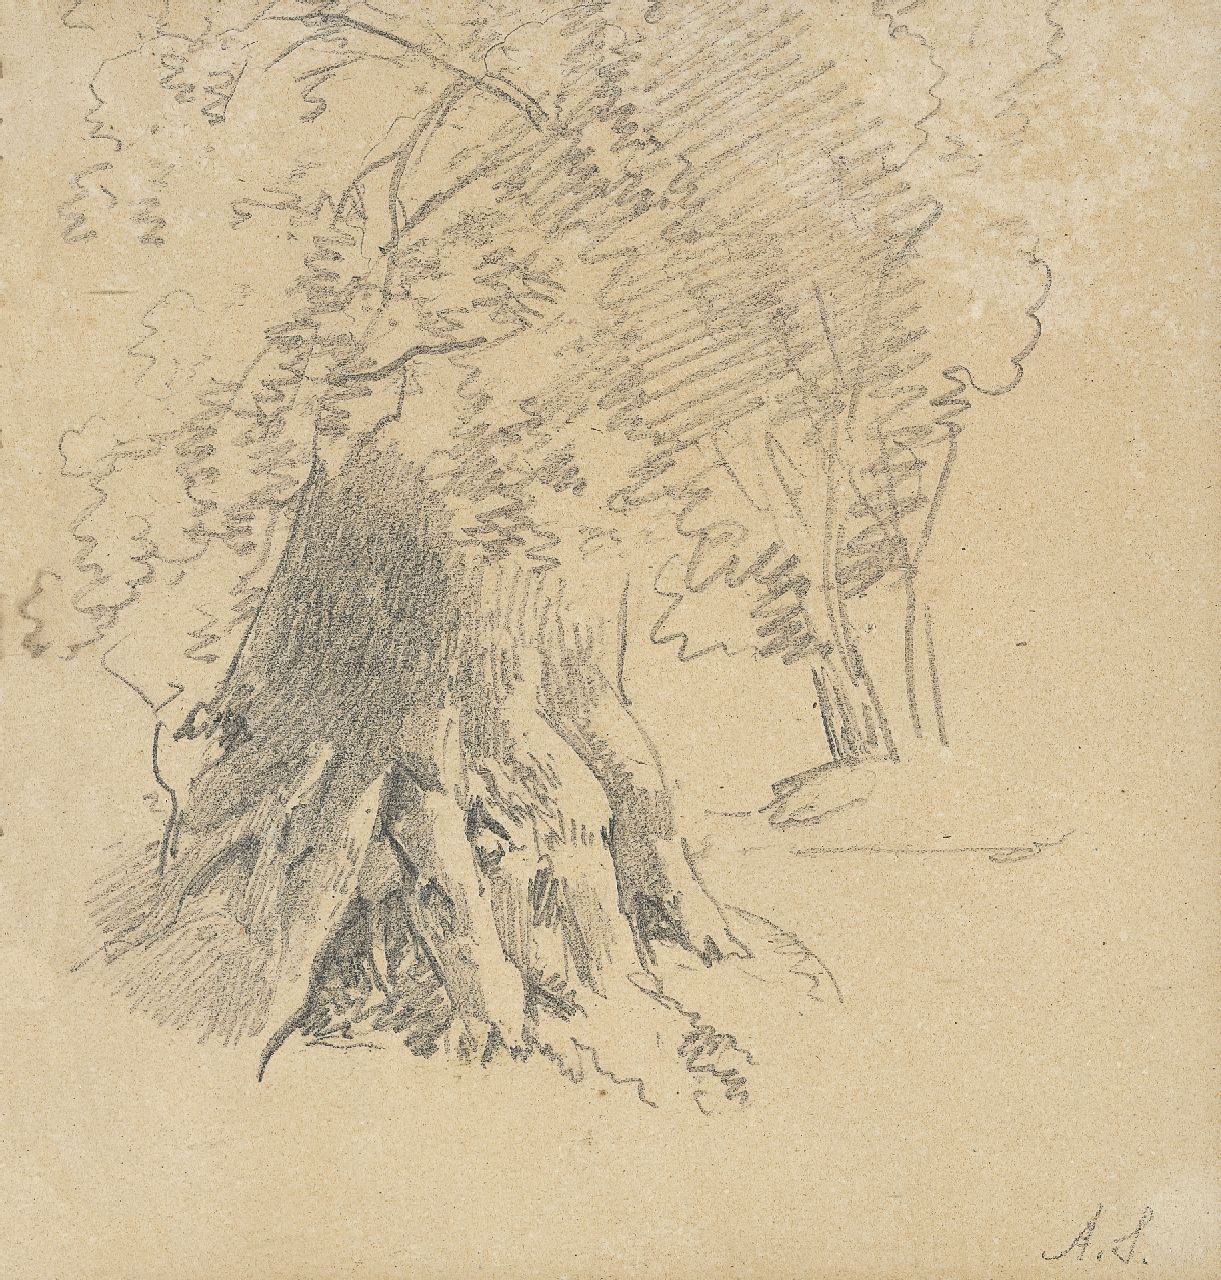 Schelfhout A.  | Andreas Schelfhout, A study of a tree, pencil on paper 17.9 x 17.4 cm, signed l.r. with initials